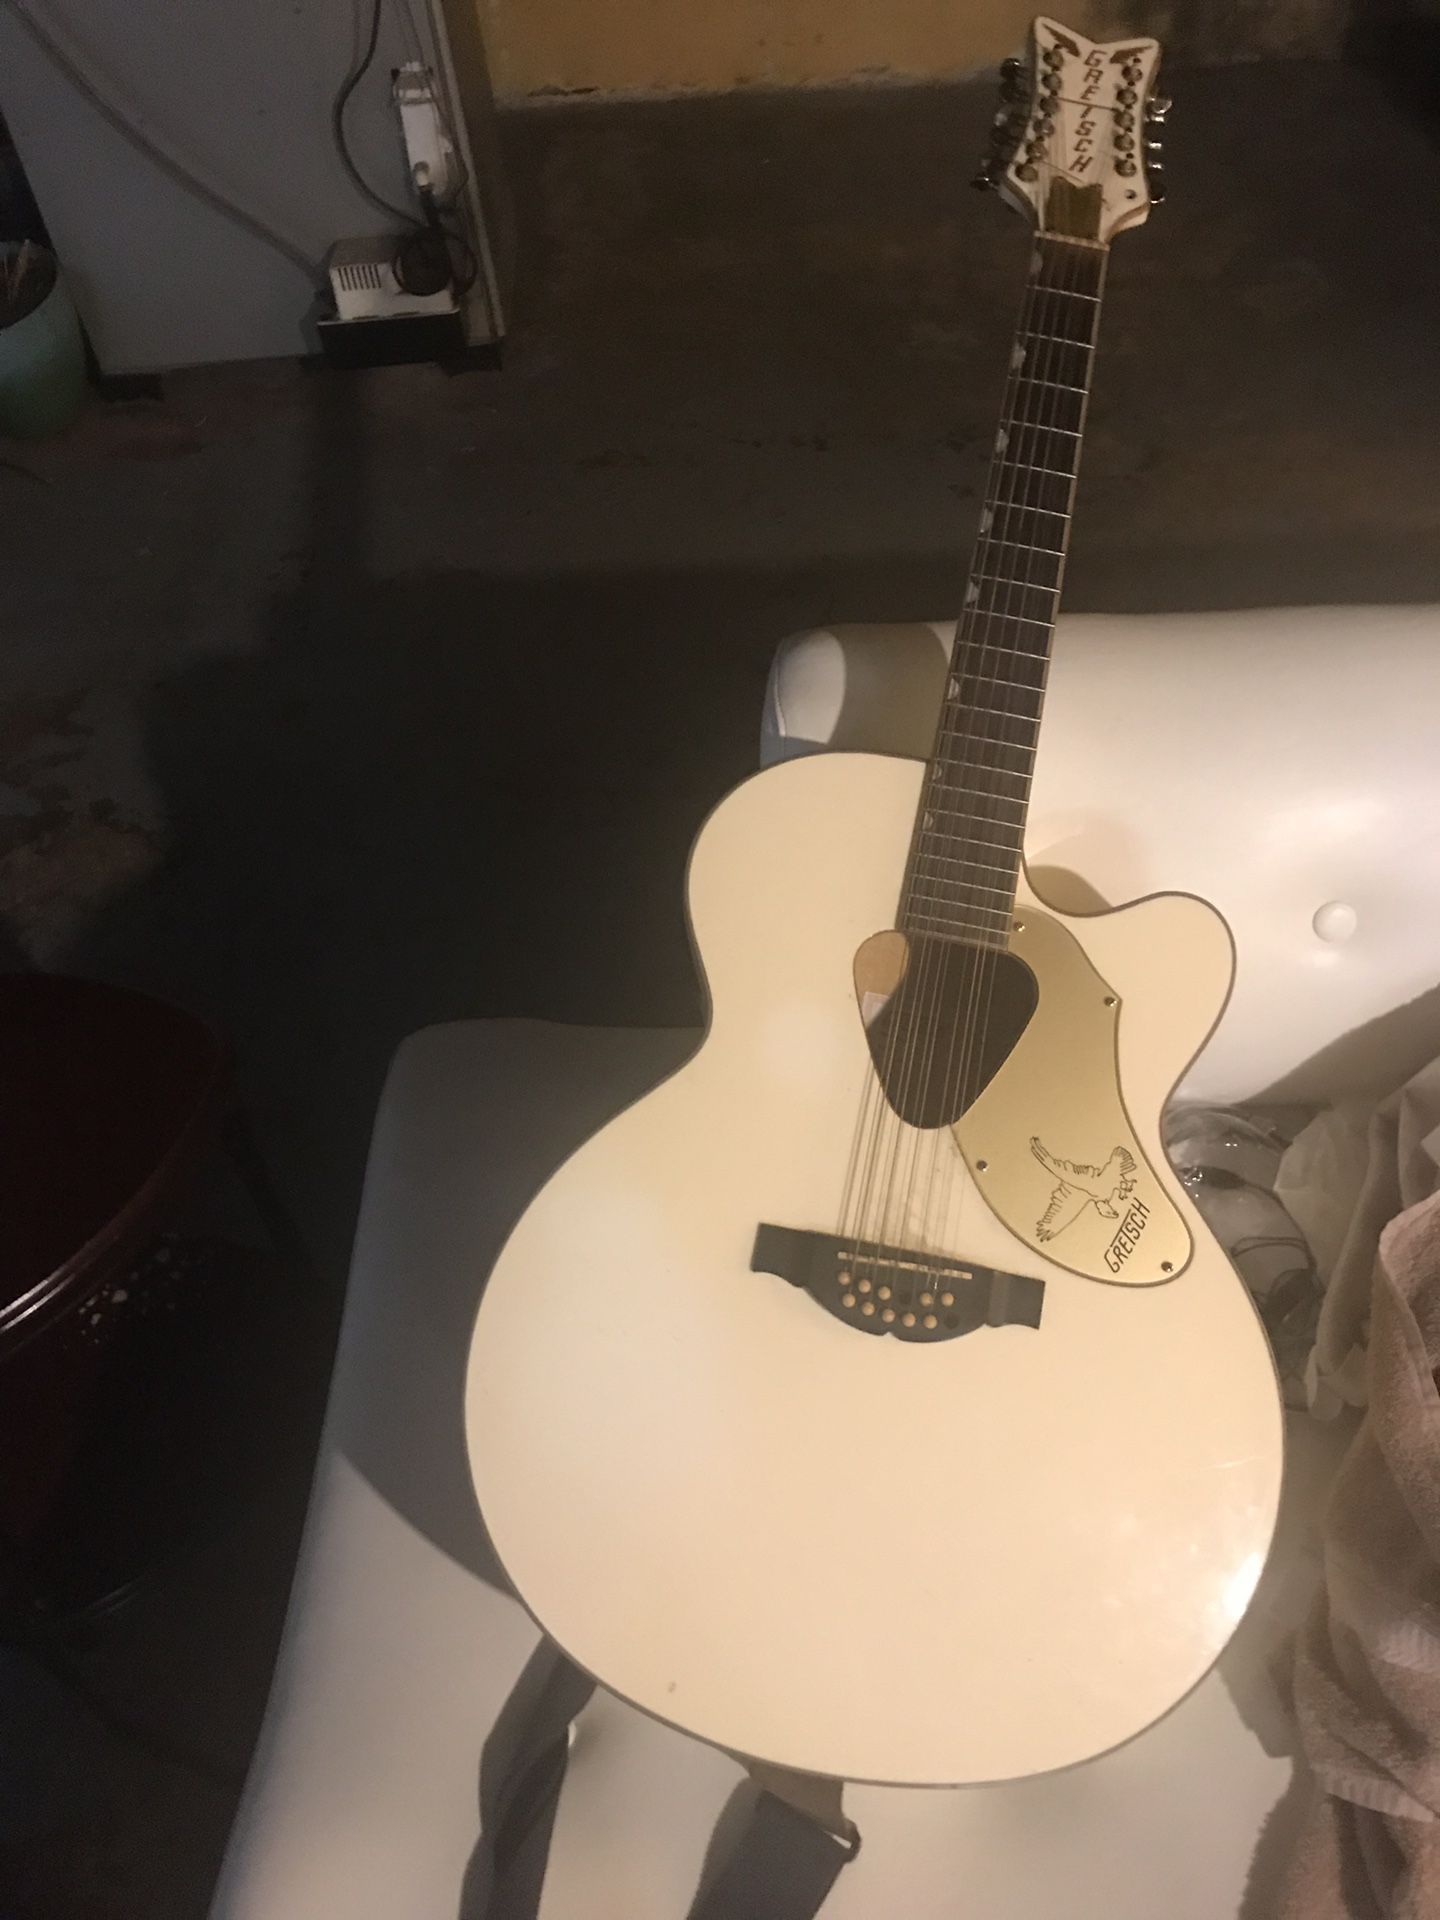 Gretsch white 12 string acoustic electric guitar